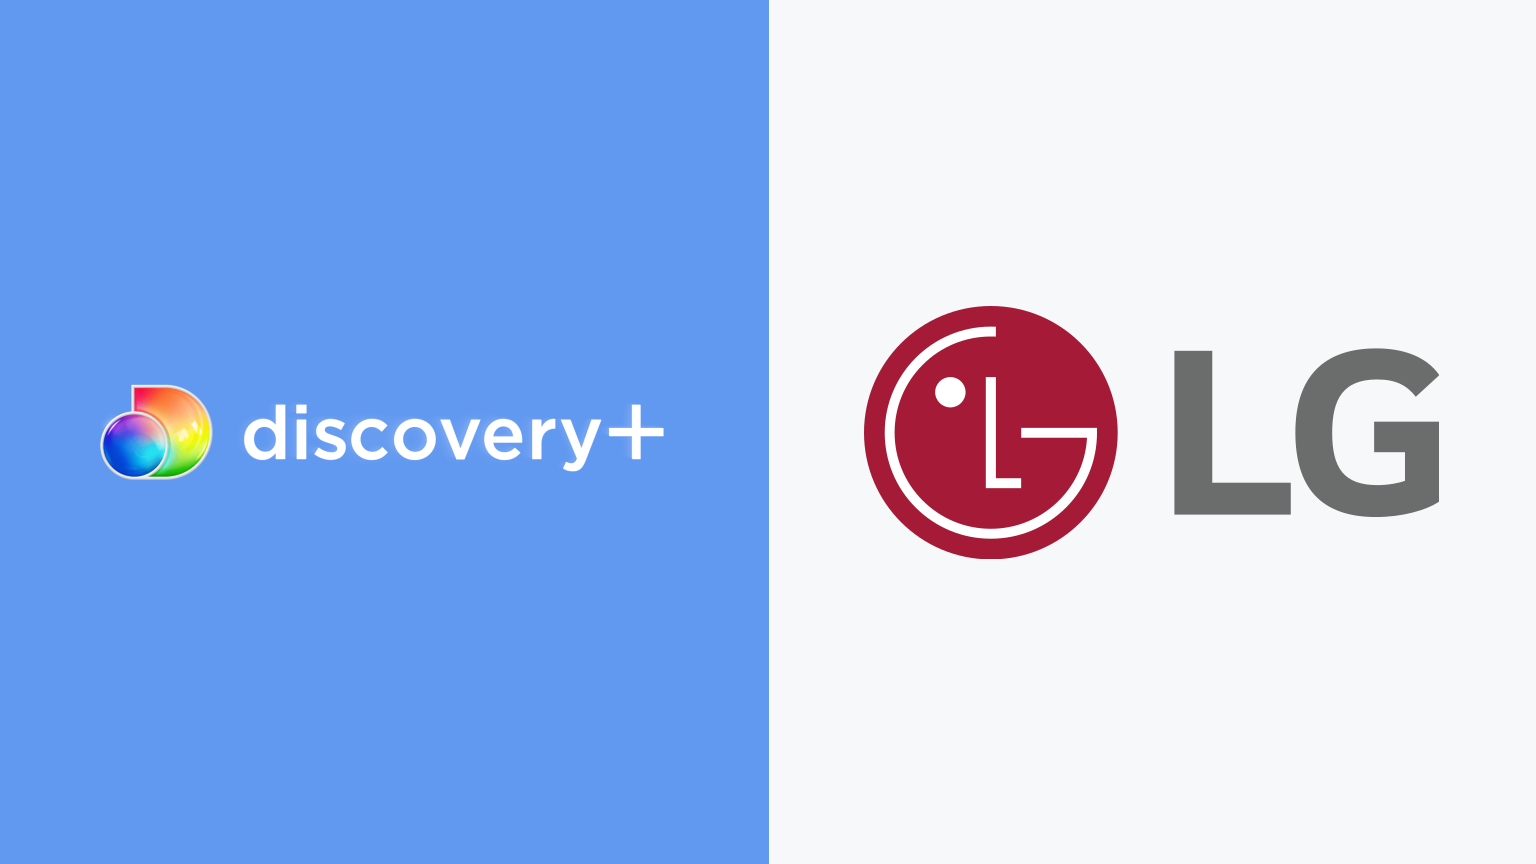 Download Discovery Plus App On Lg Tv